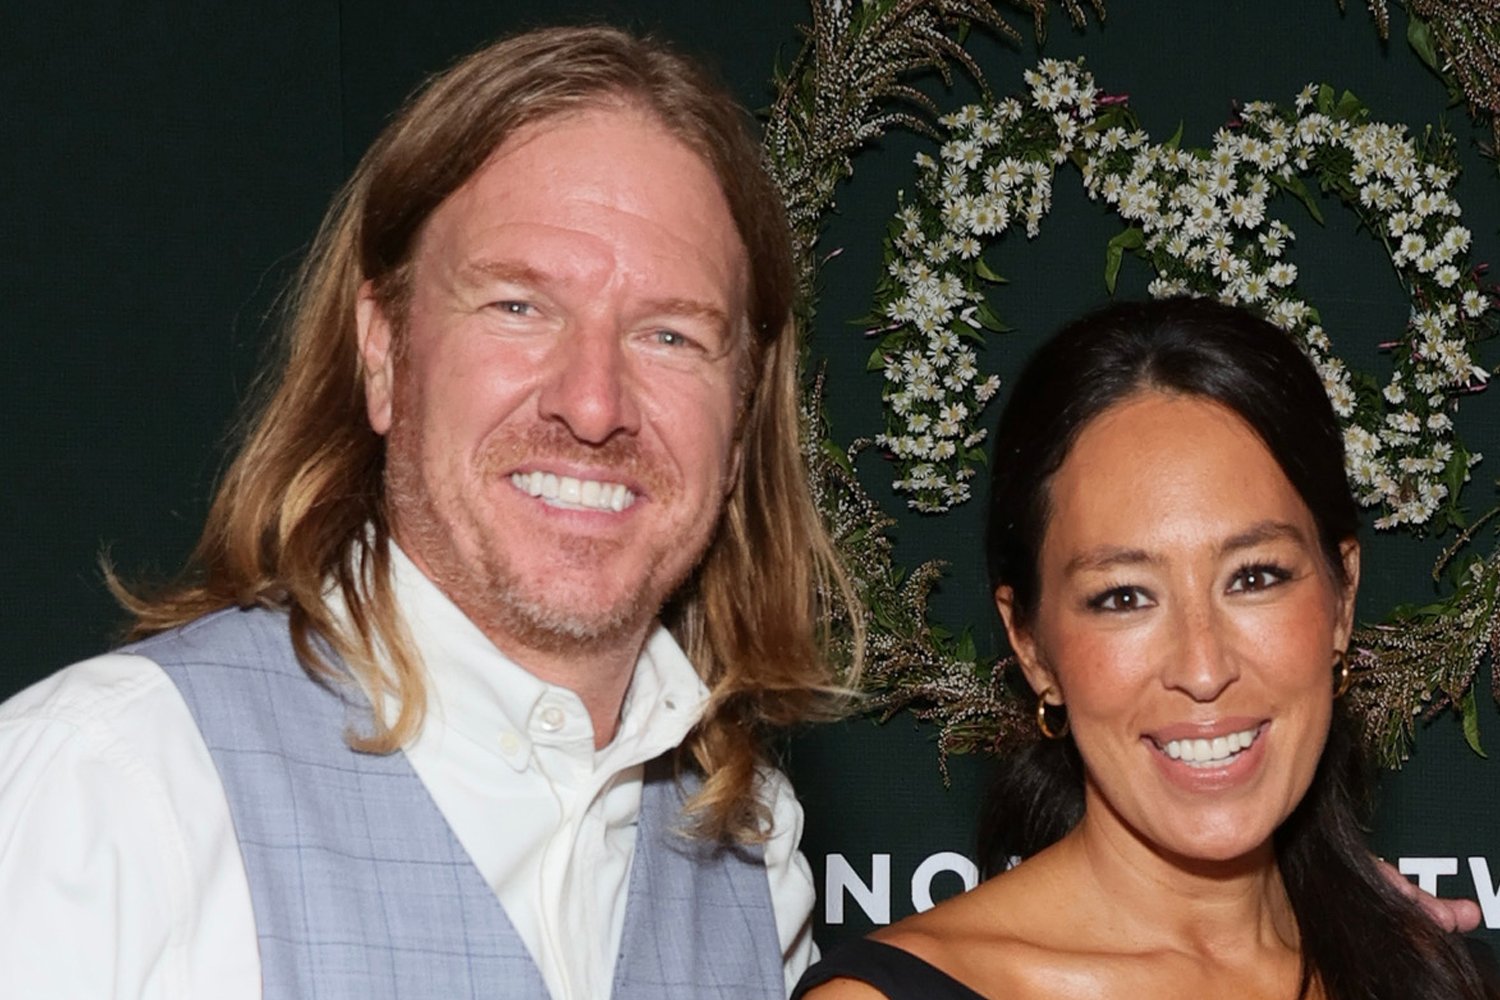 Chip and Joanna Gaines smiling for the camera